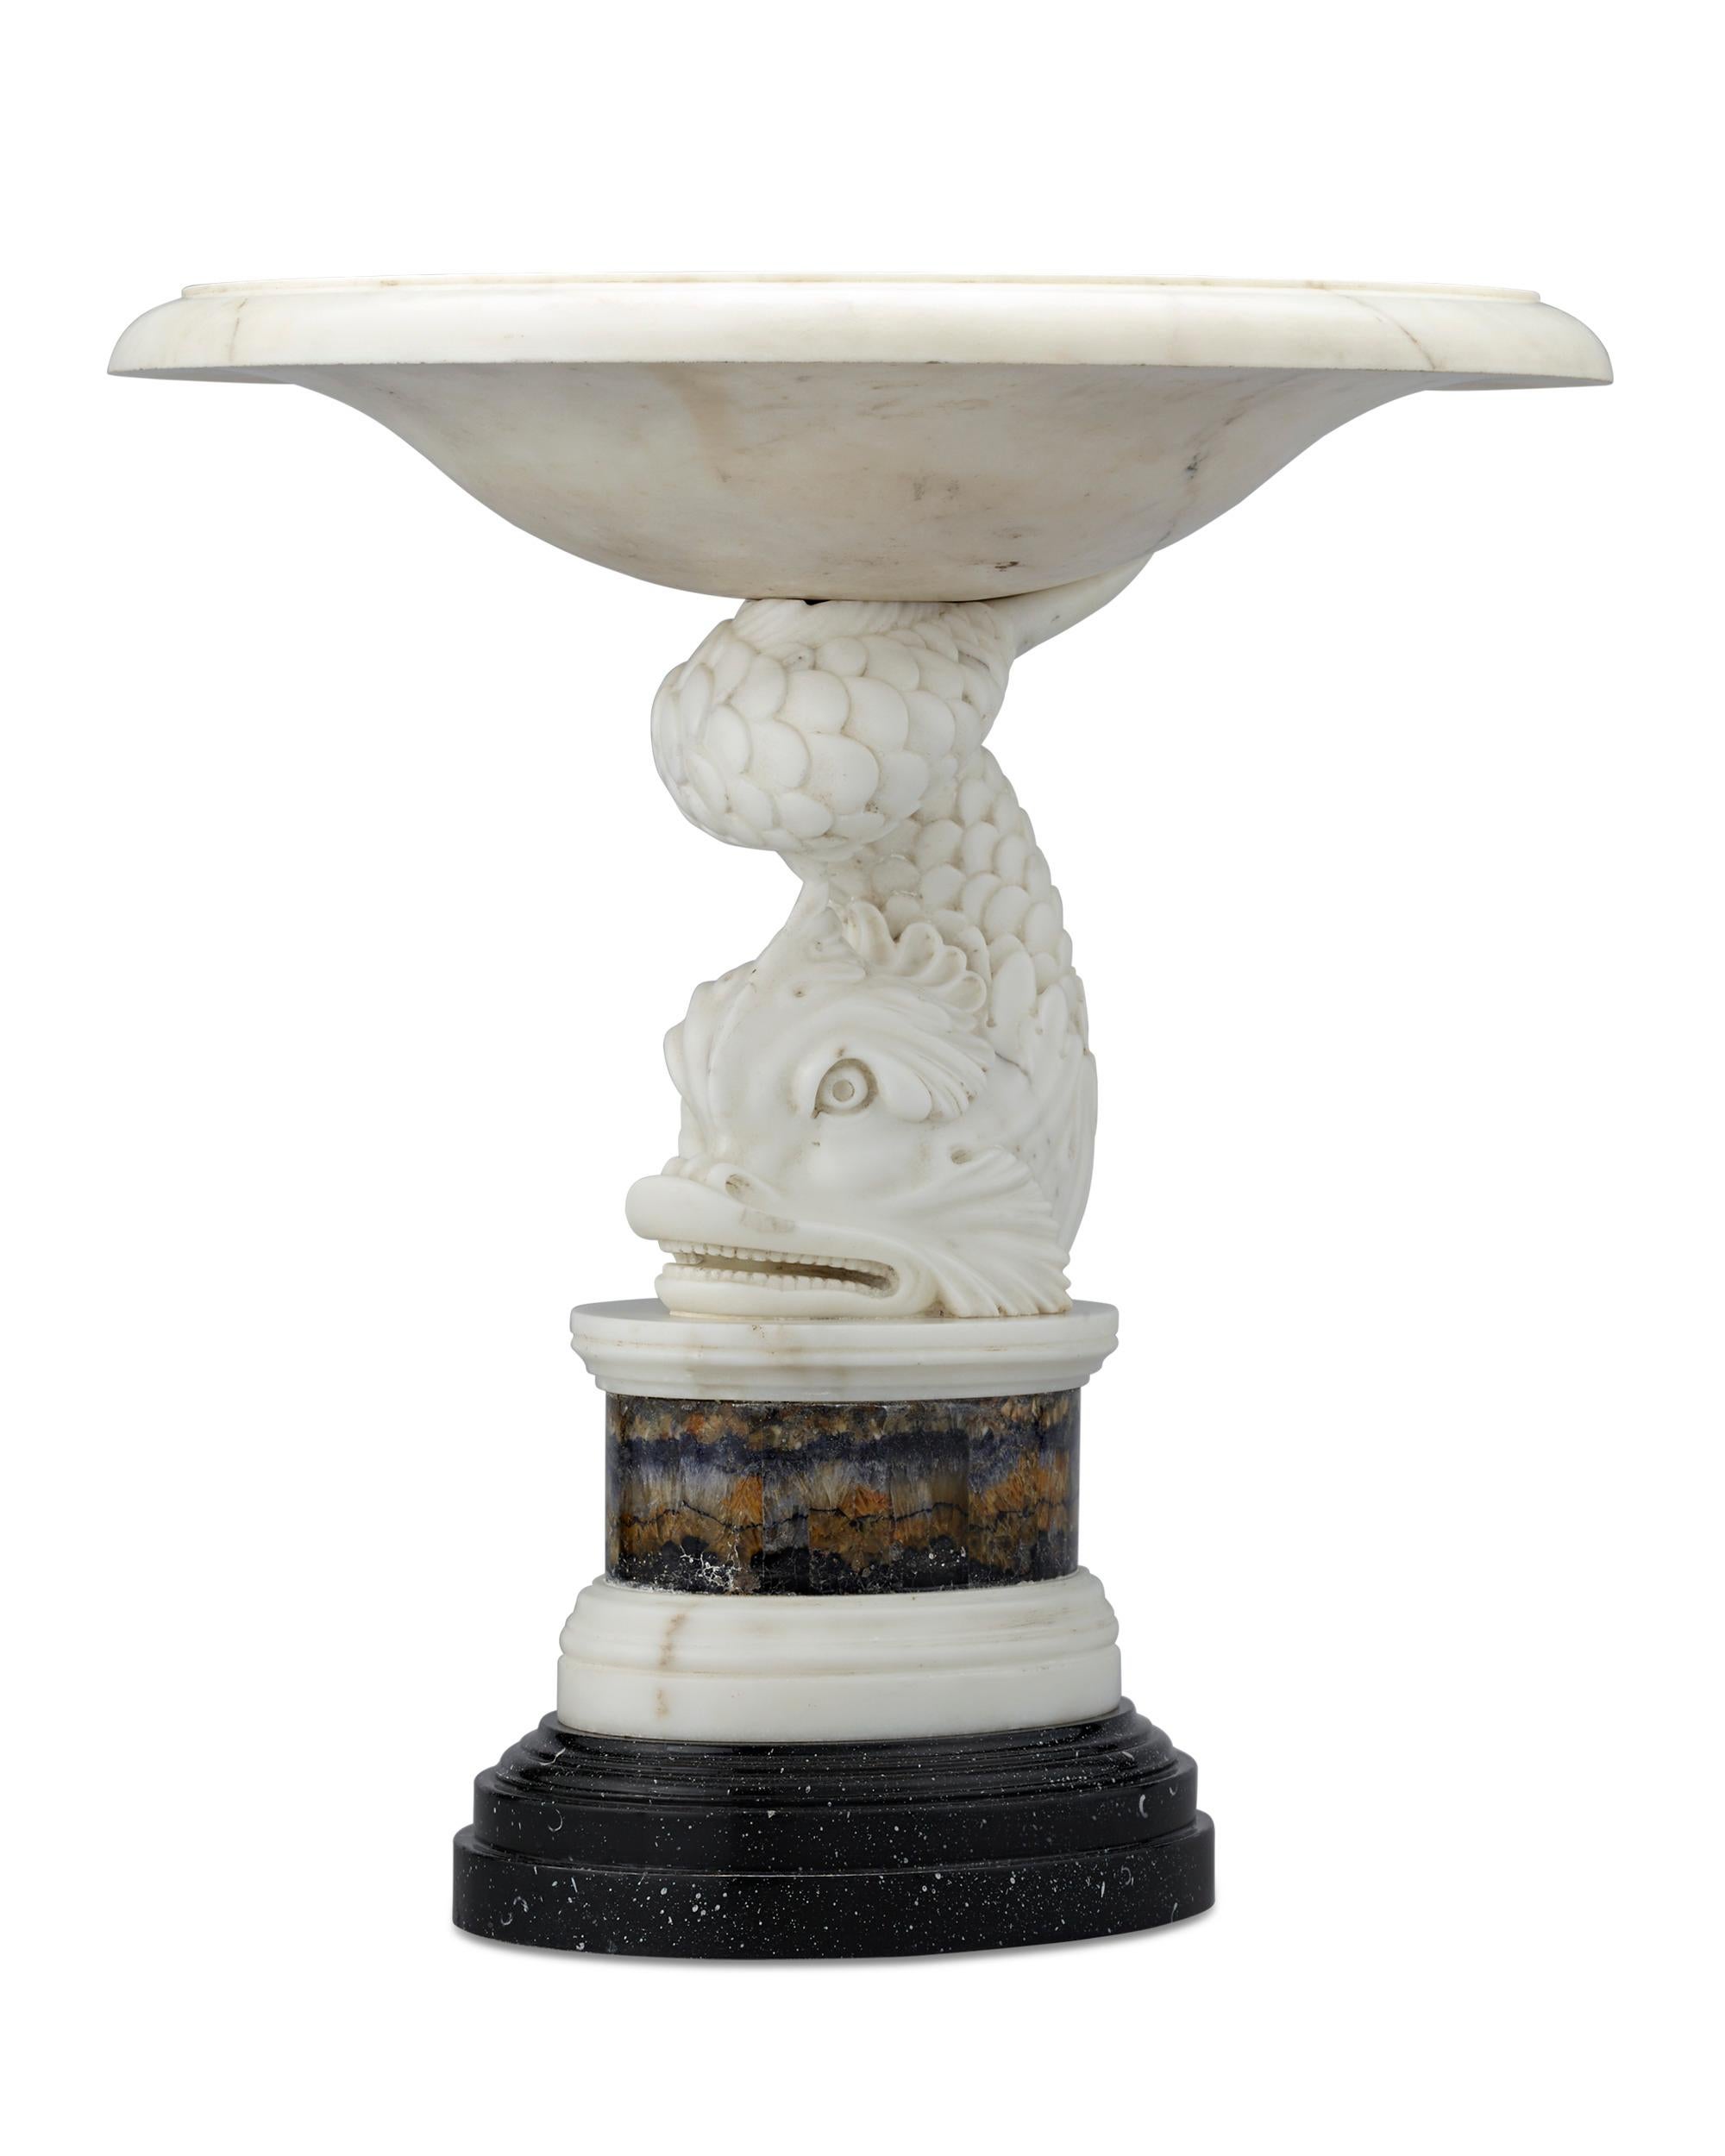 This important George III tazza is attributed to famed Scottish-Swedish architect Sir William Chambers. The magnificent piece features a base carved from statuary marble in the shape of a stylized dolphin, which relates to Chambers' extraordinary